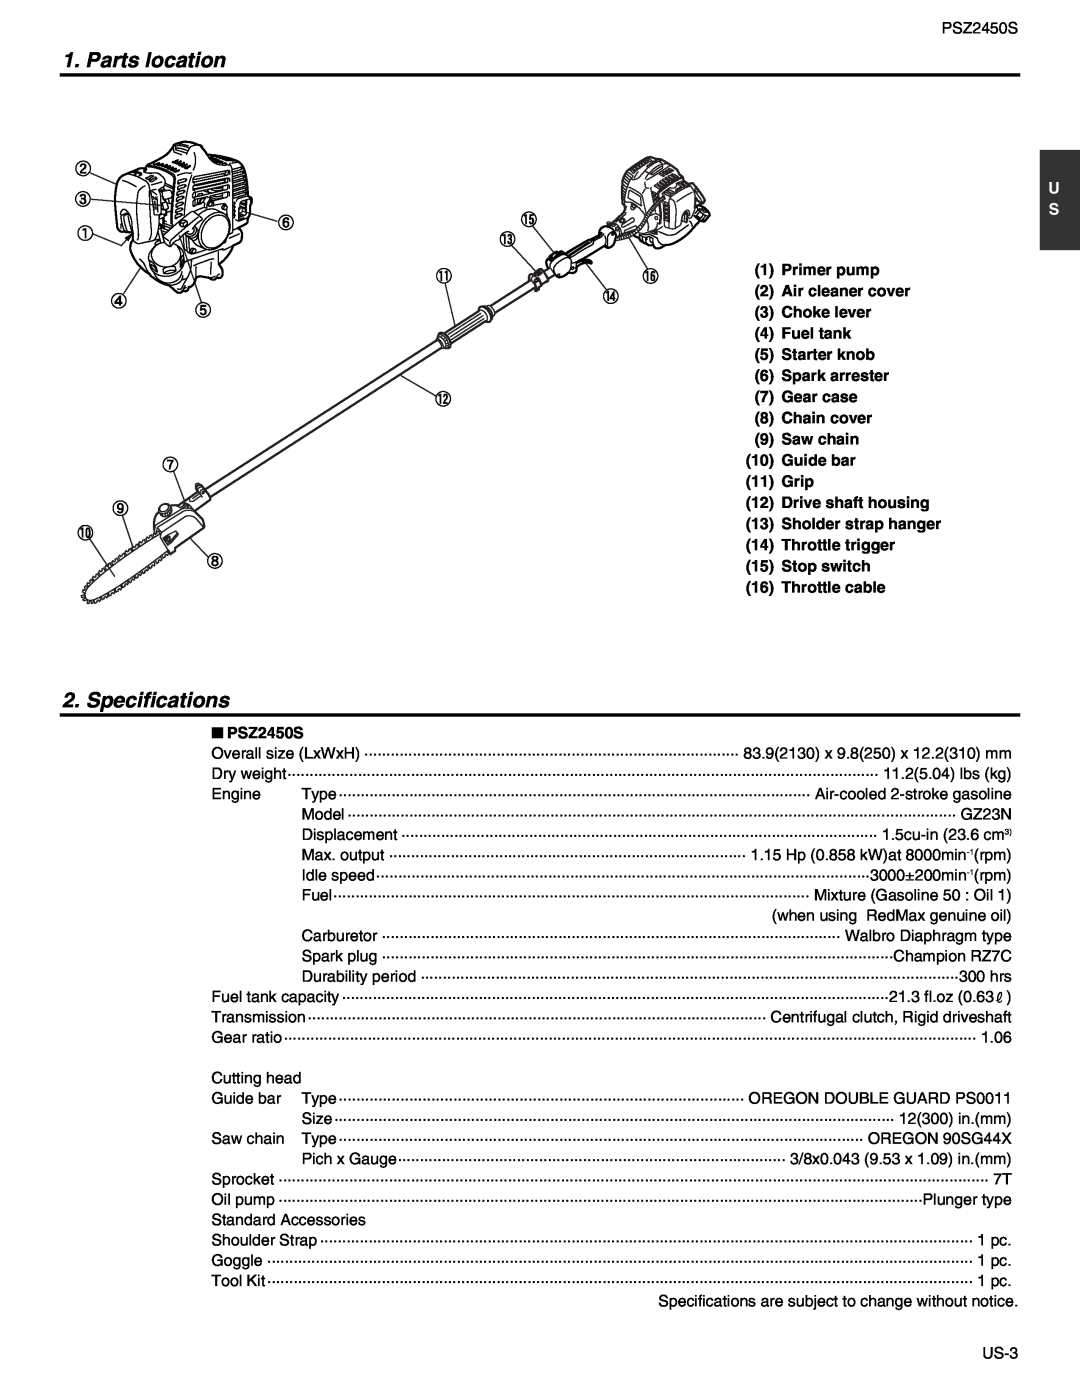 RedMax PSZ2450S manual Parts location, Specifications 